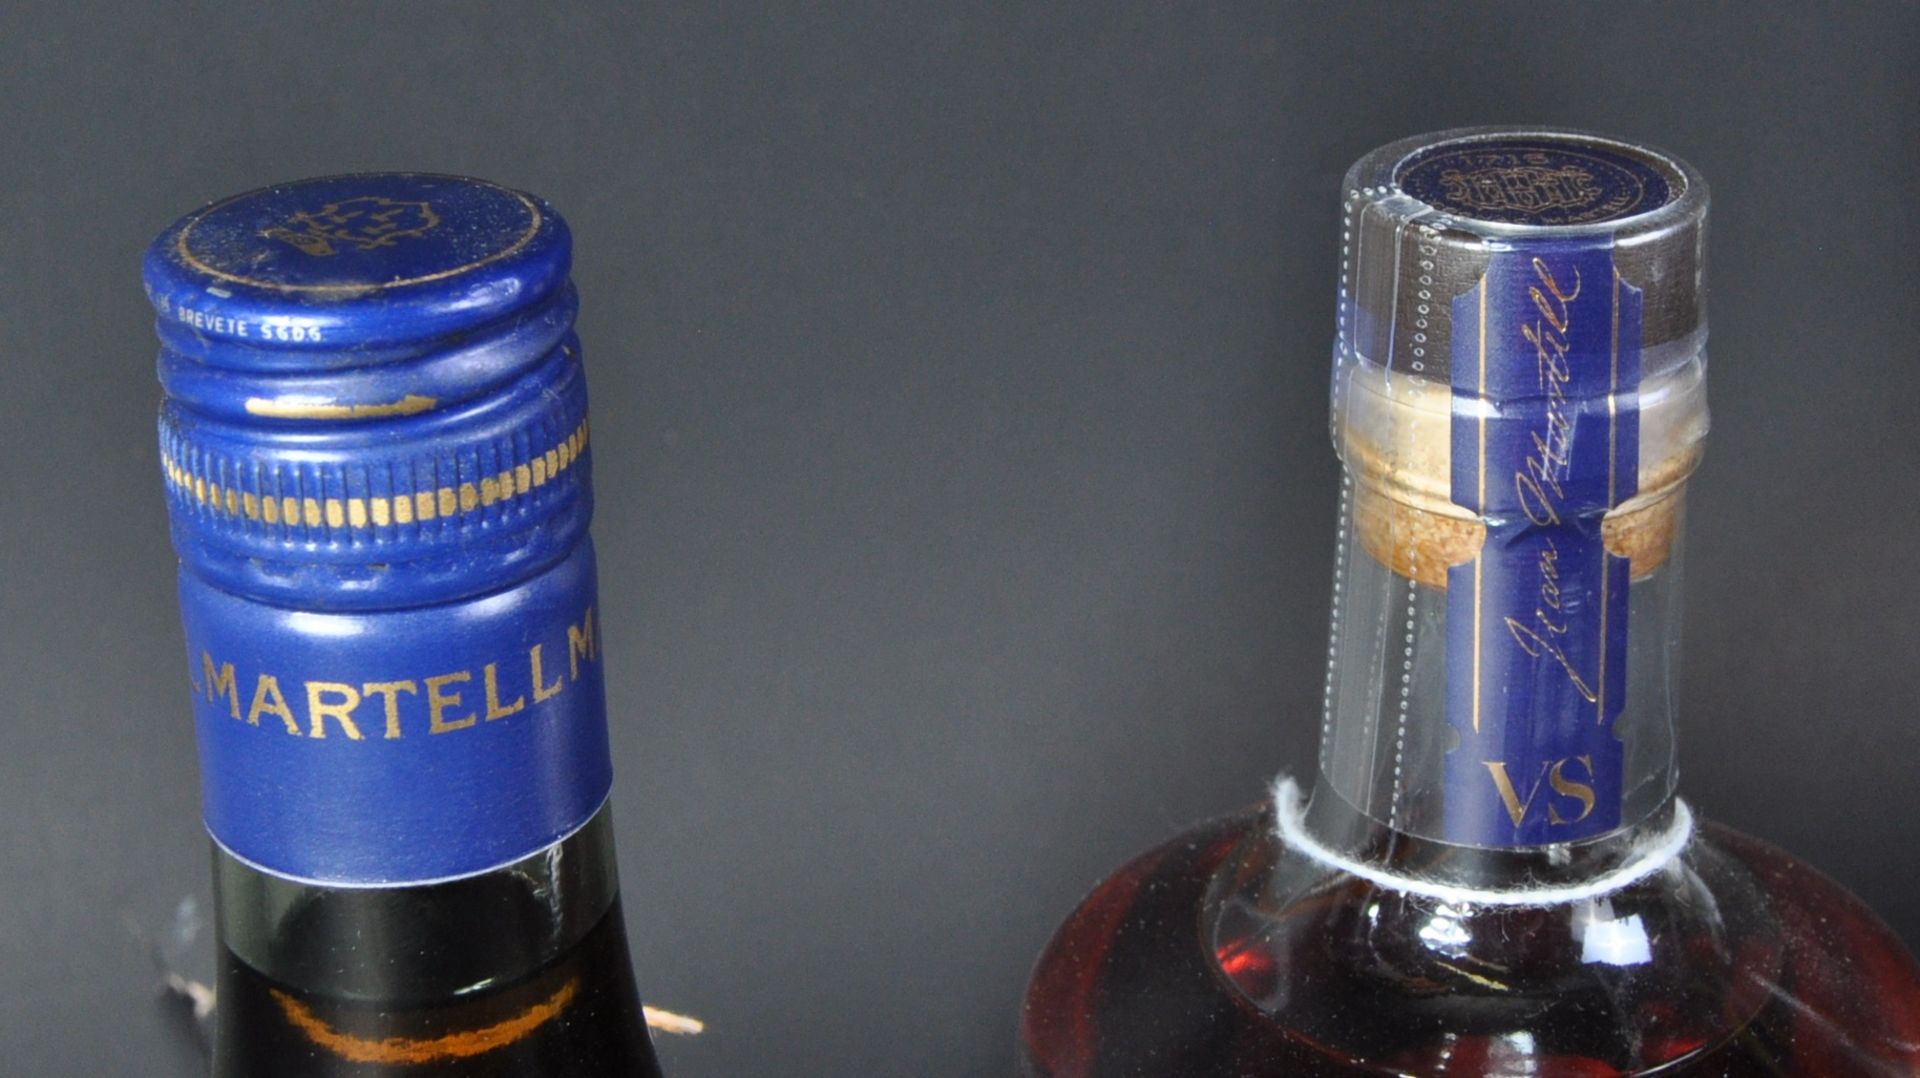 TWO BOTTLES OF MARTELL FRENCH COGNAC - Image 2 of 2